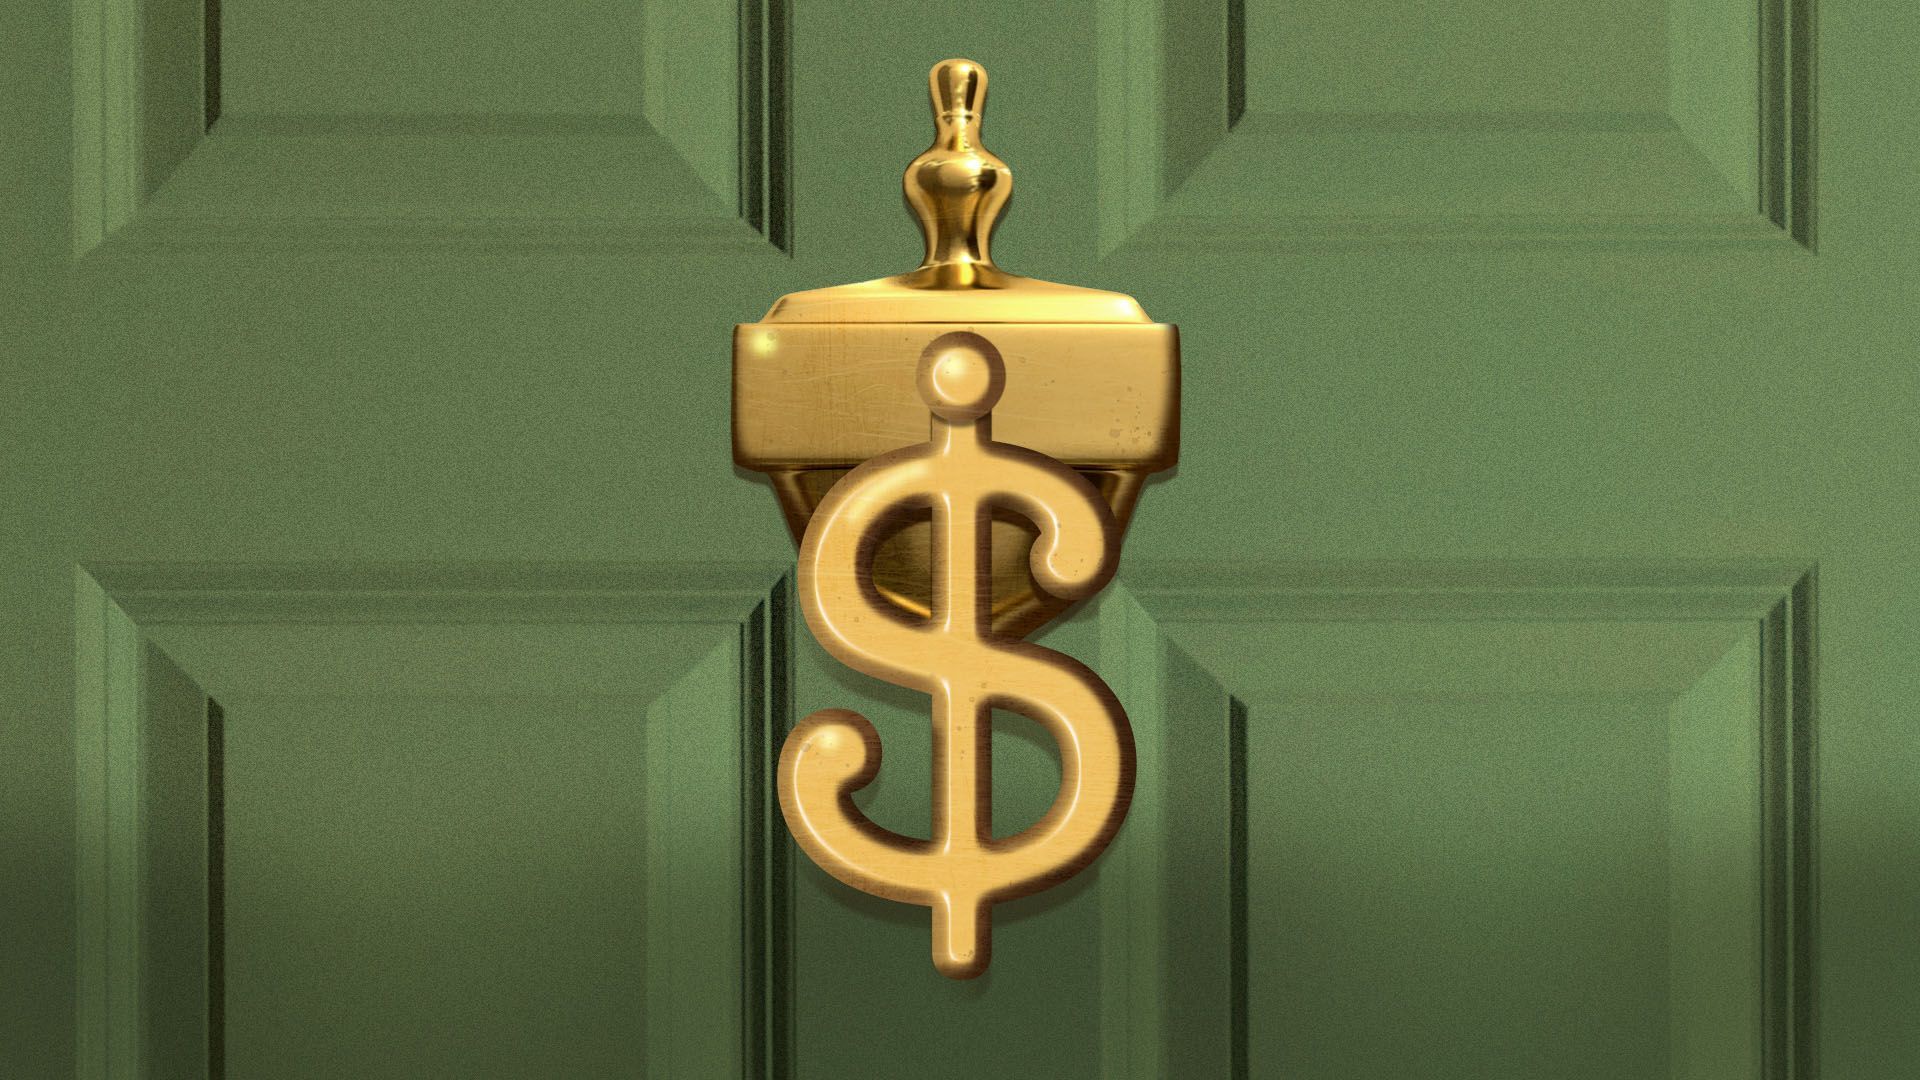 Illustration of a door knocker in the shape of a dollar sign